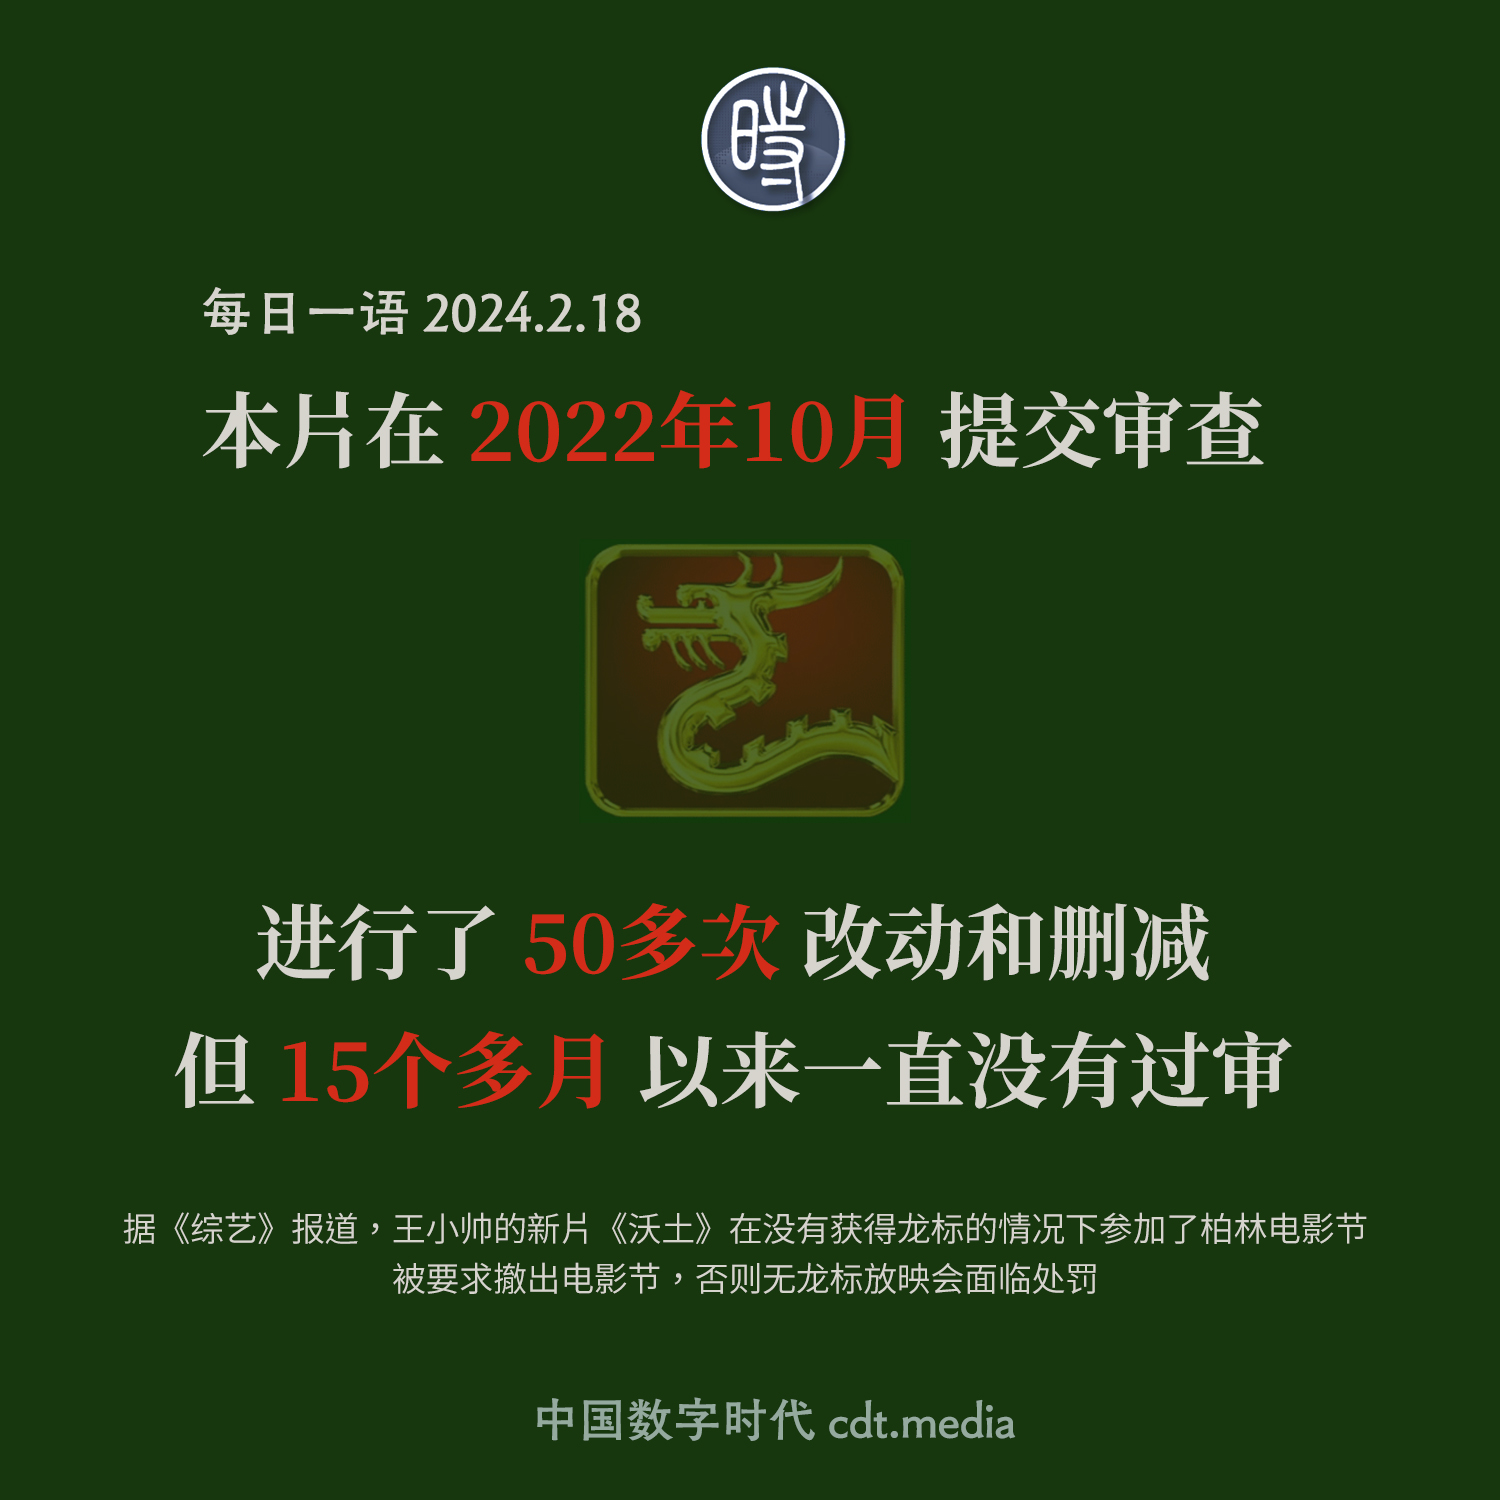 This CDT “Quote of the Day” card is designed to resemble the China National Film Bureau’s “Dragon Seal” of approval that appears before the credits of all films that have been approved by Chinese censors. The text is red and white against a dark green background, with a red-and-gold seal in the middle, in the shape of a dragon.